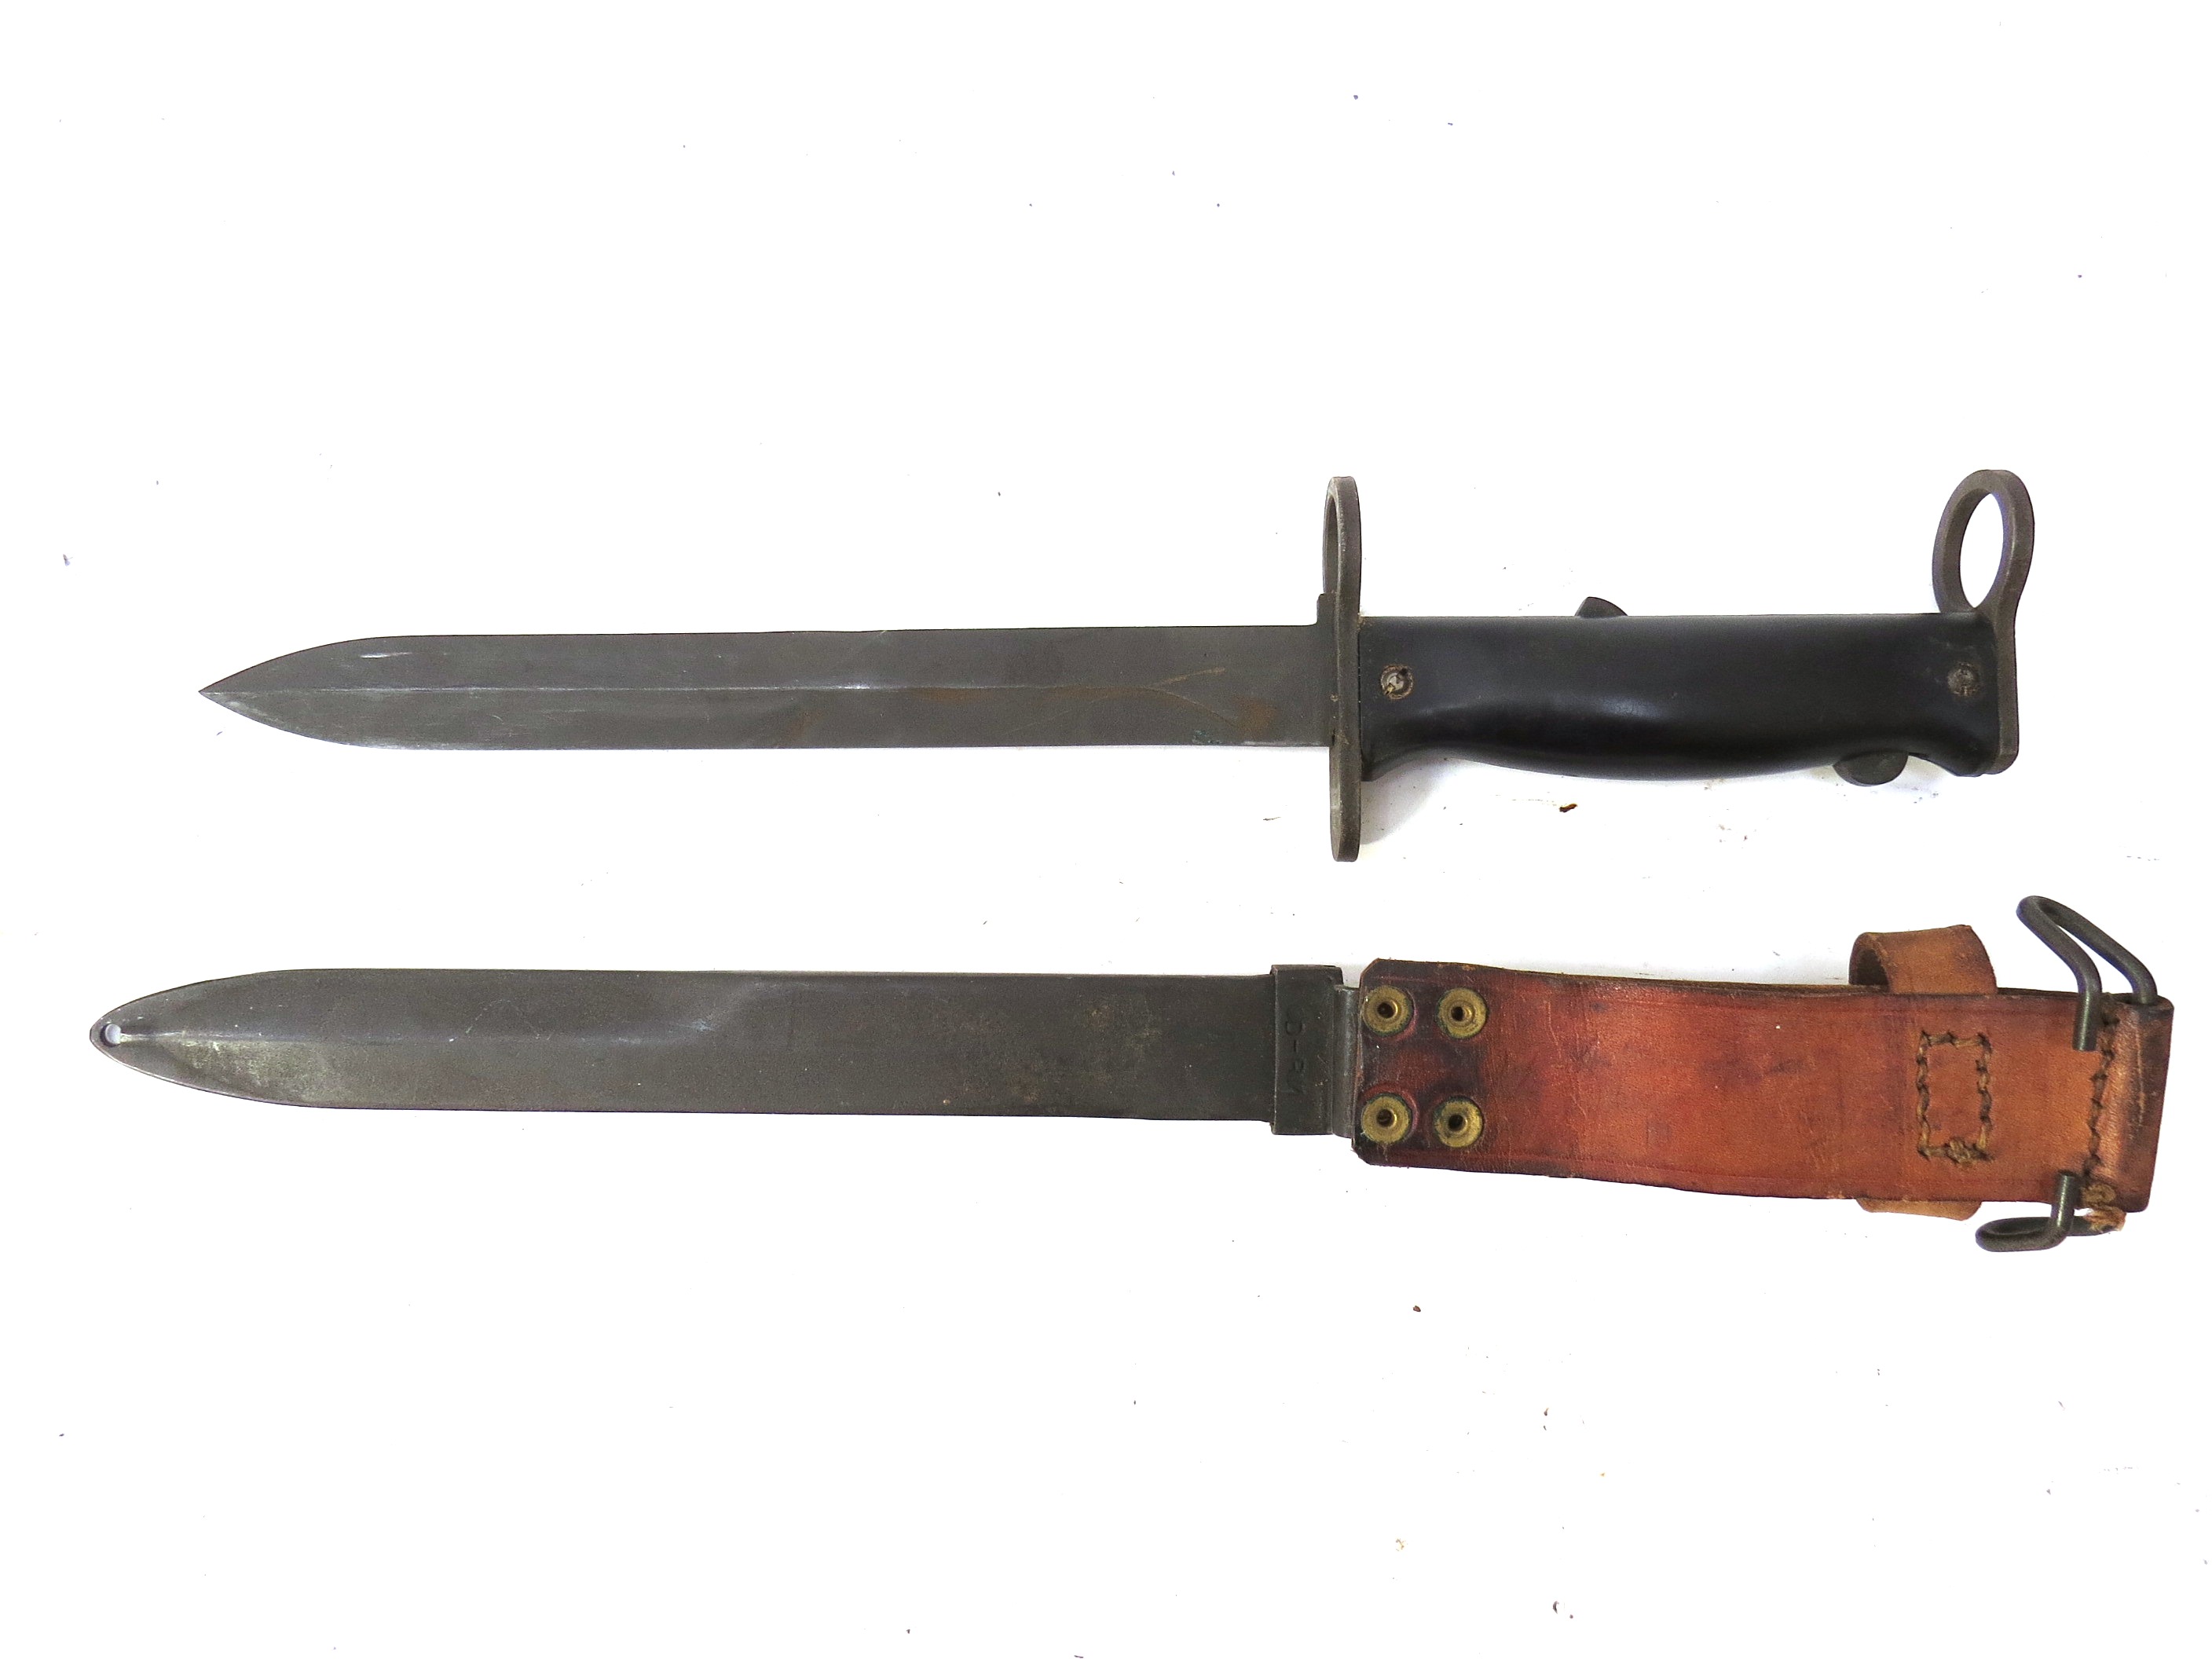 A French MAS 49/56 knife bayonet wtih scabbard and brown leather belt loop - Image 2 of 2